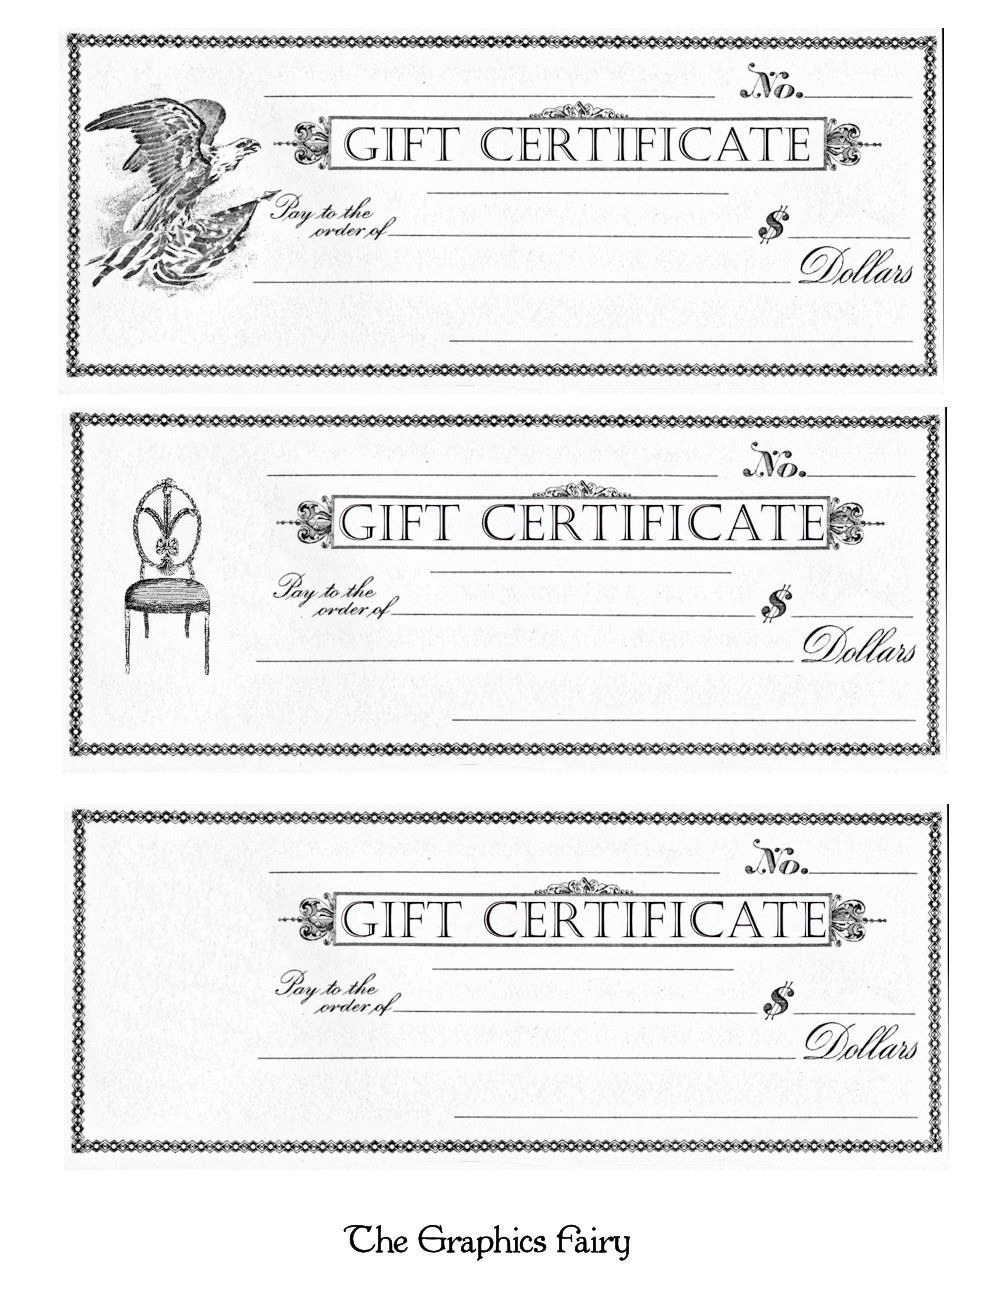 Free Printable - Gift Certificates | Craft Ideas | Pinterest | Free - Free Printable Gift Certificates